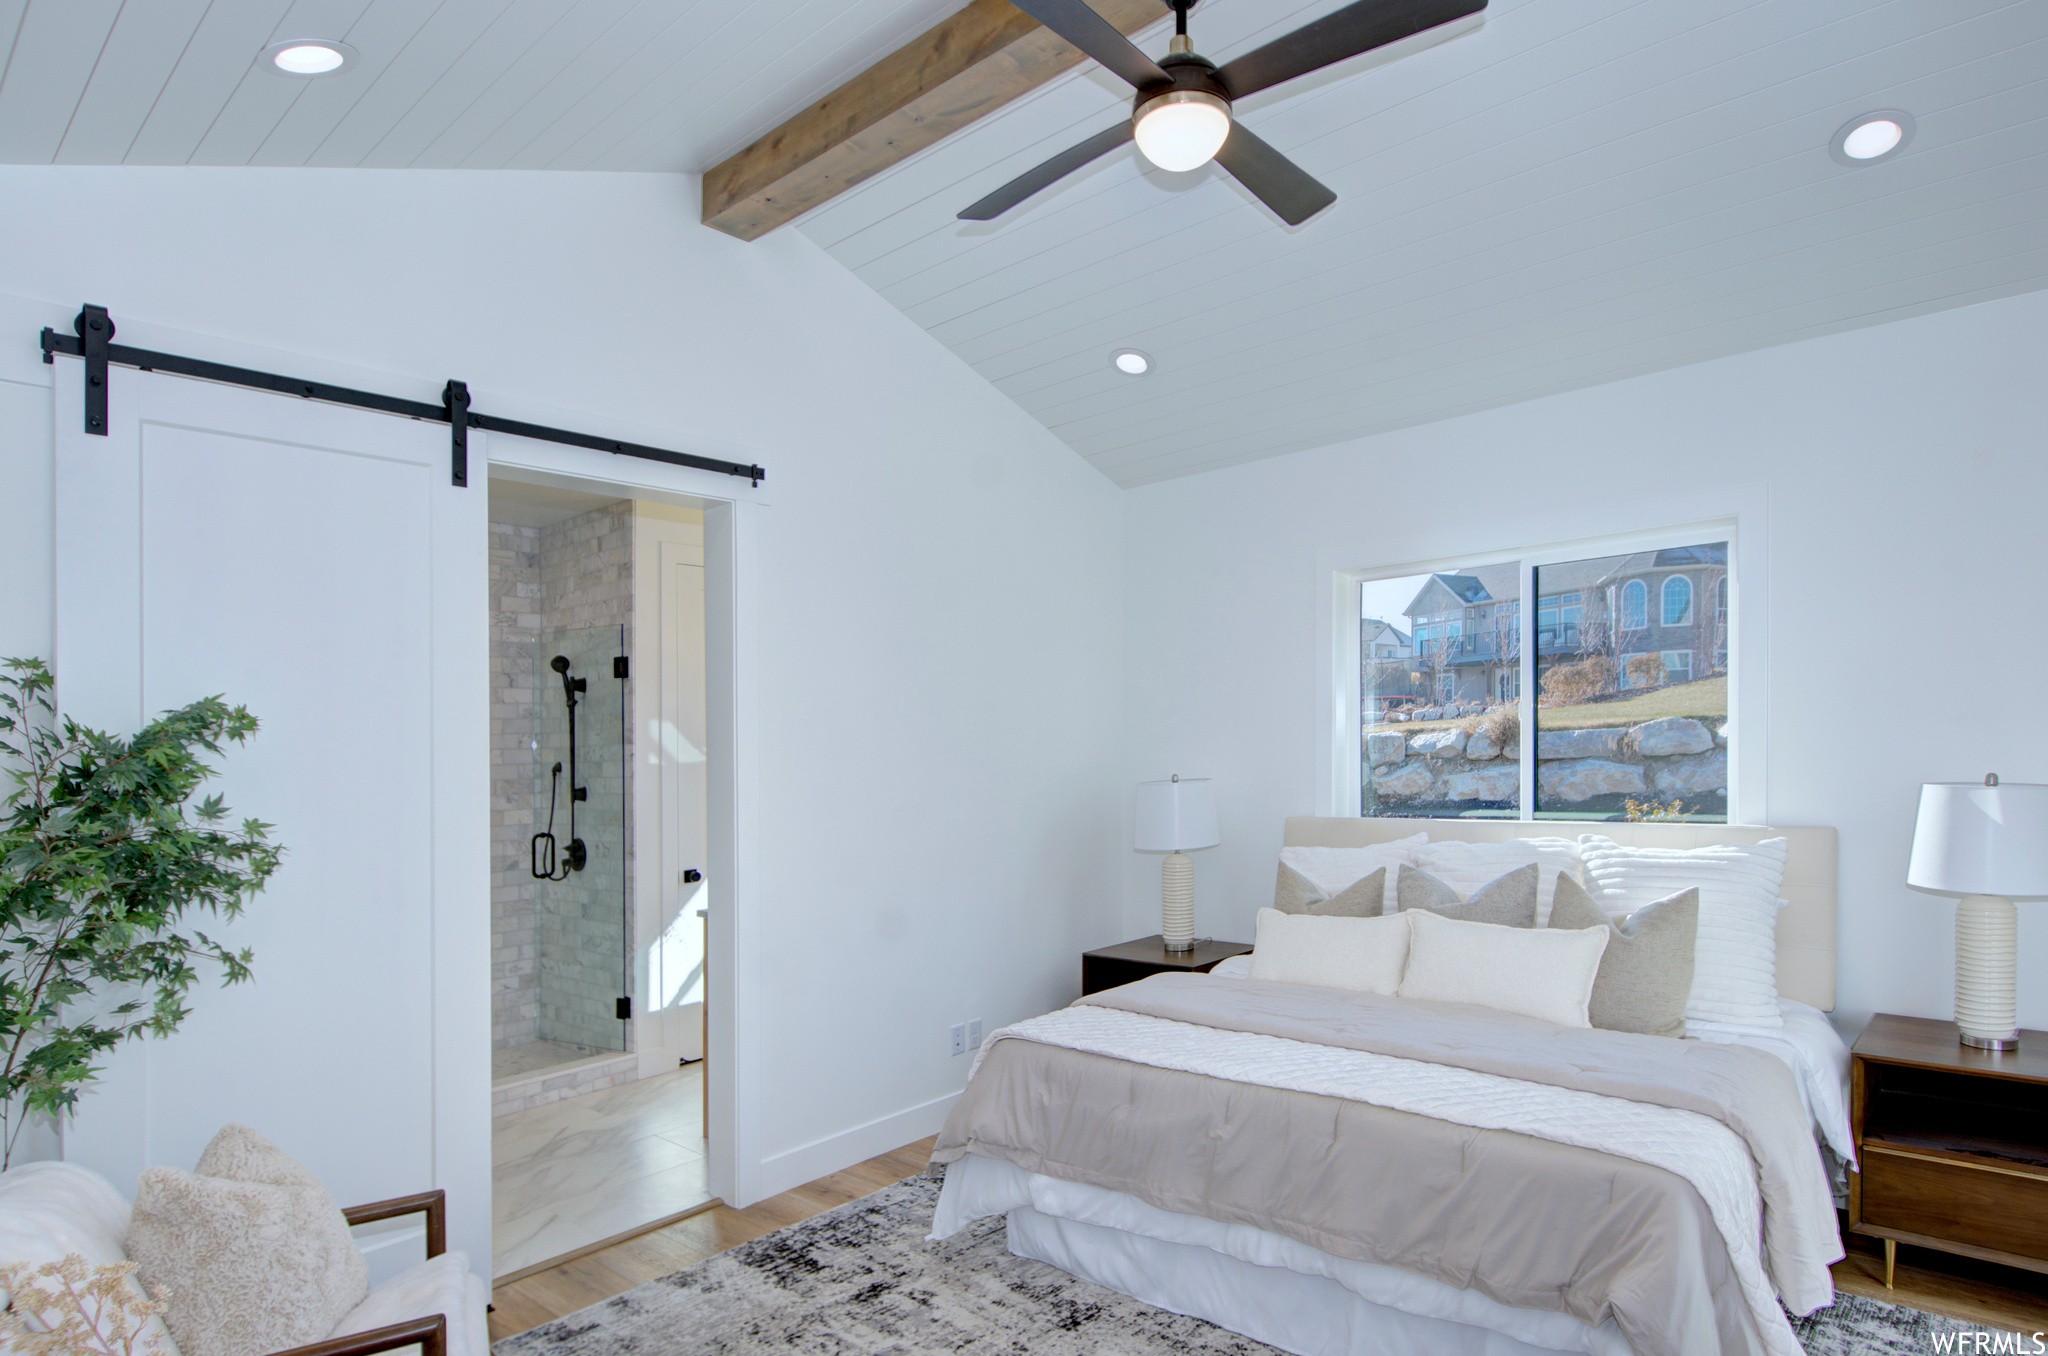 Master Bedroom with Vaulted Ceilings, fan and LED lighting